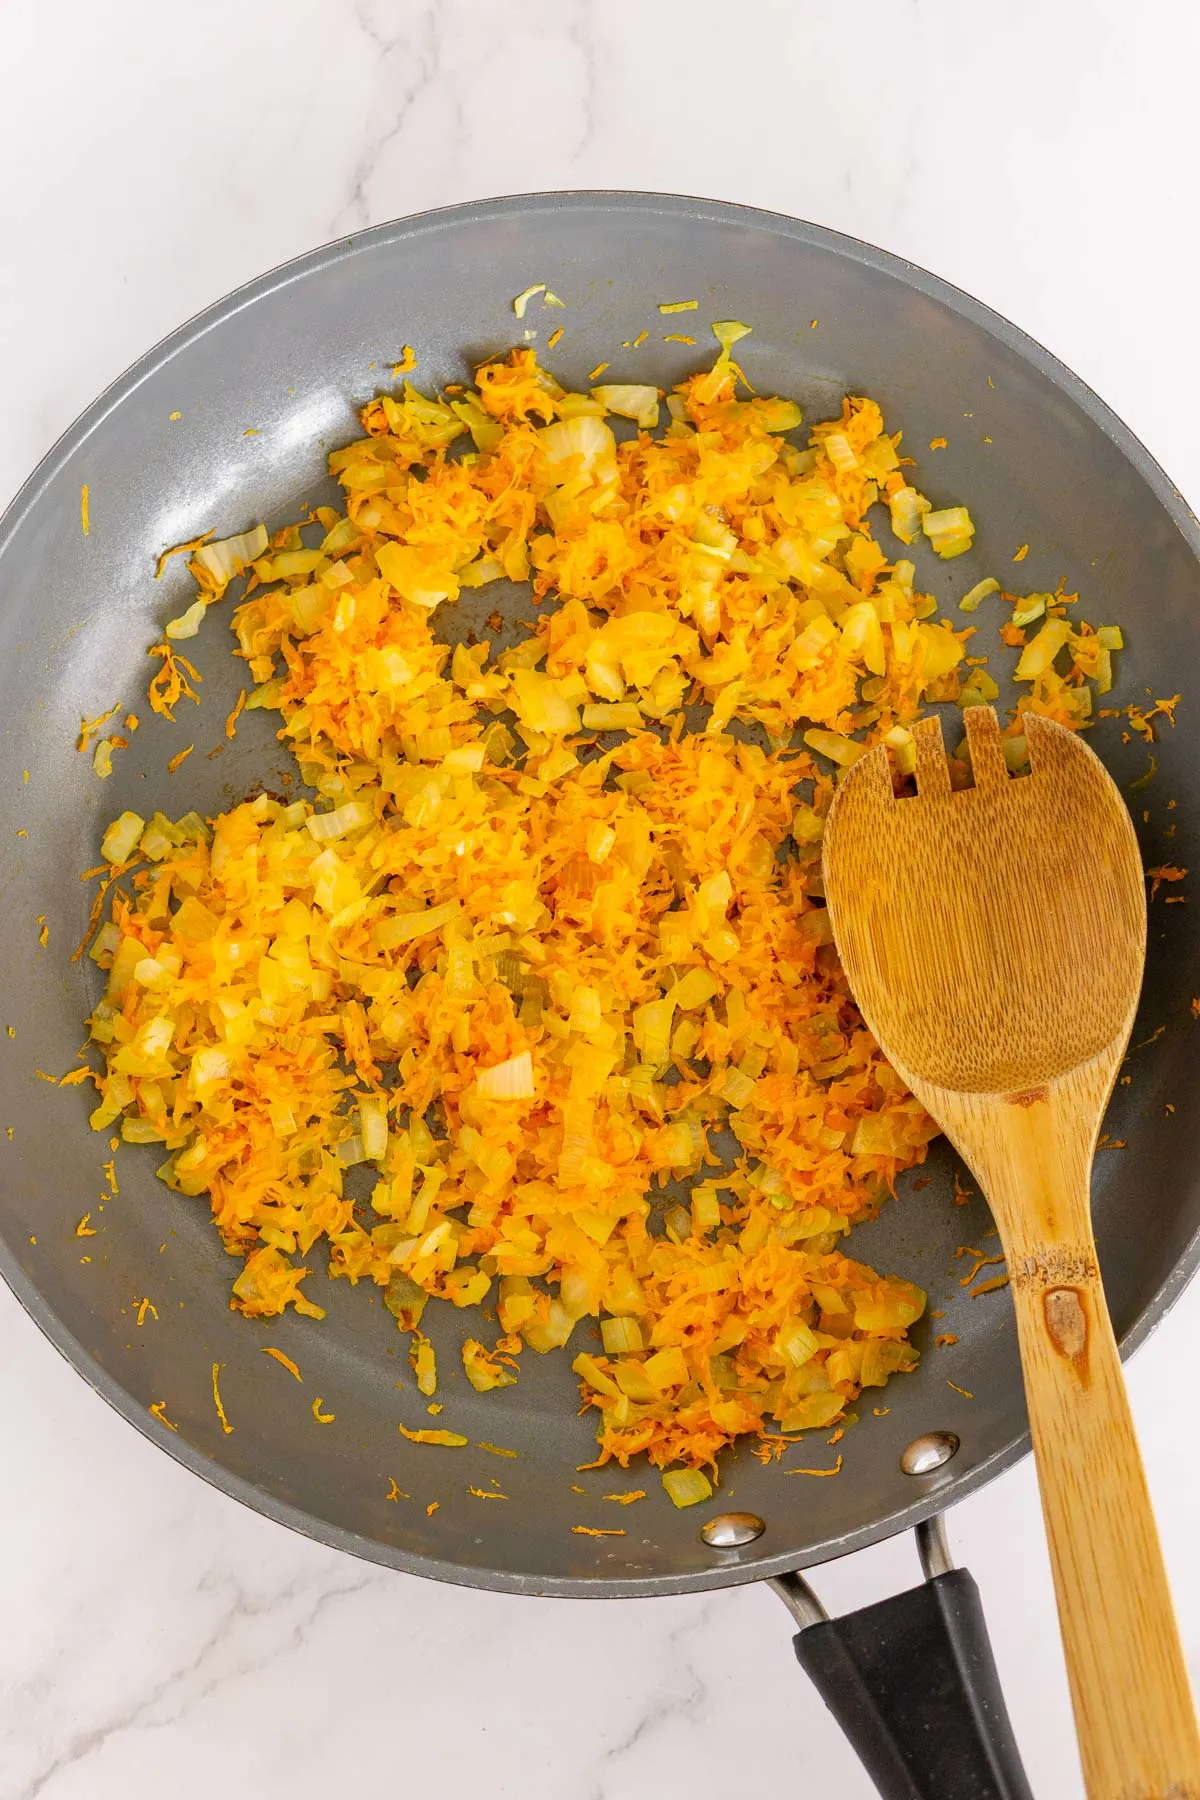 Sauteed carrot and onion in a pan.